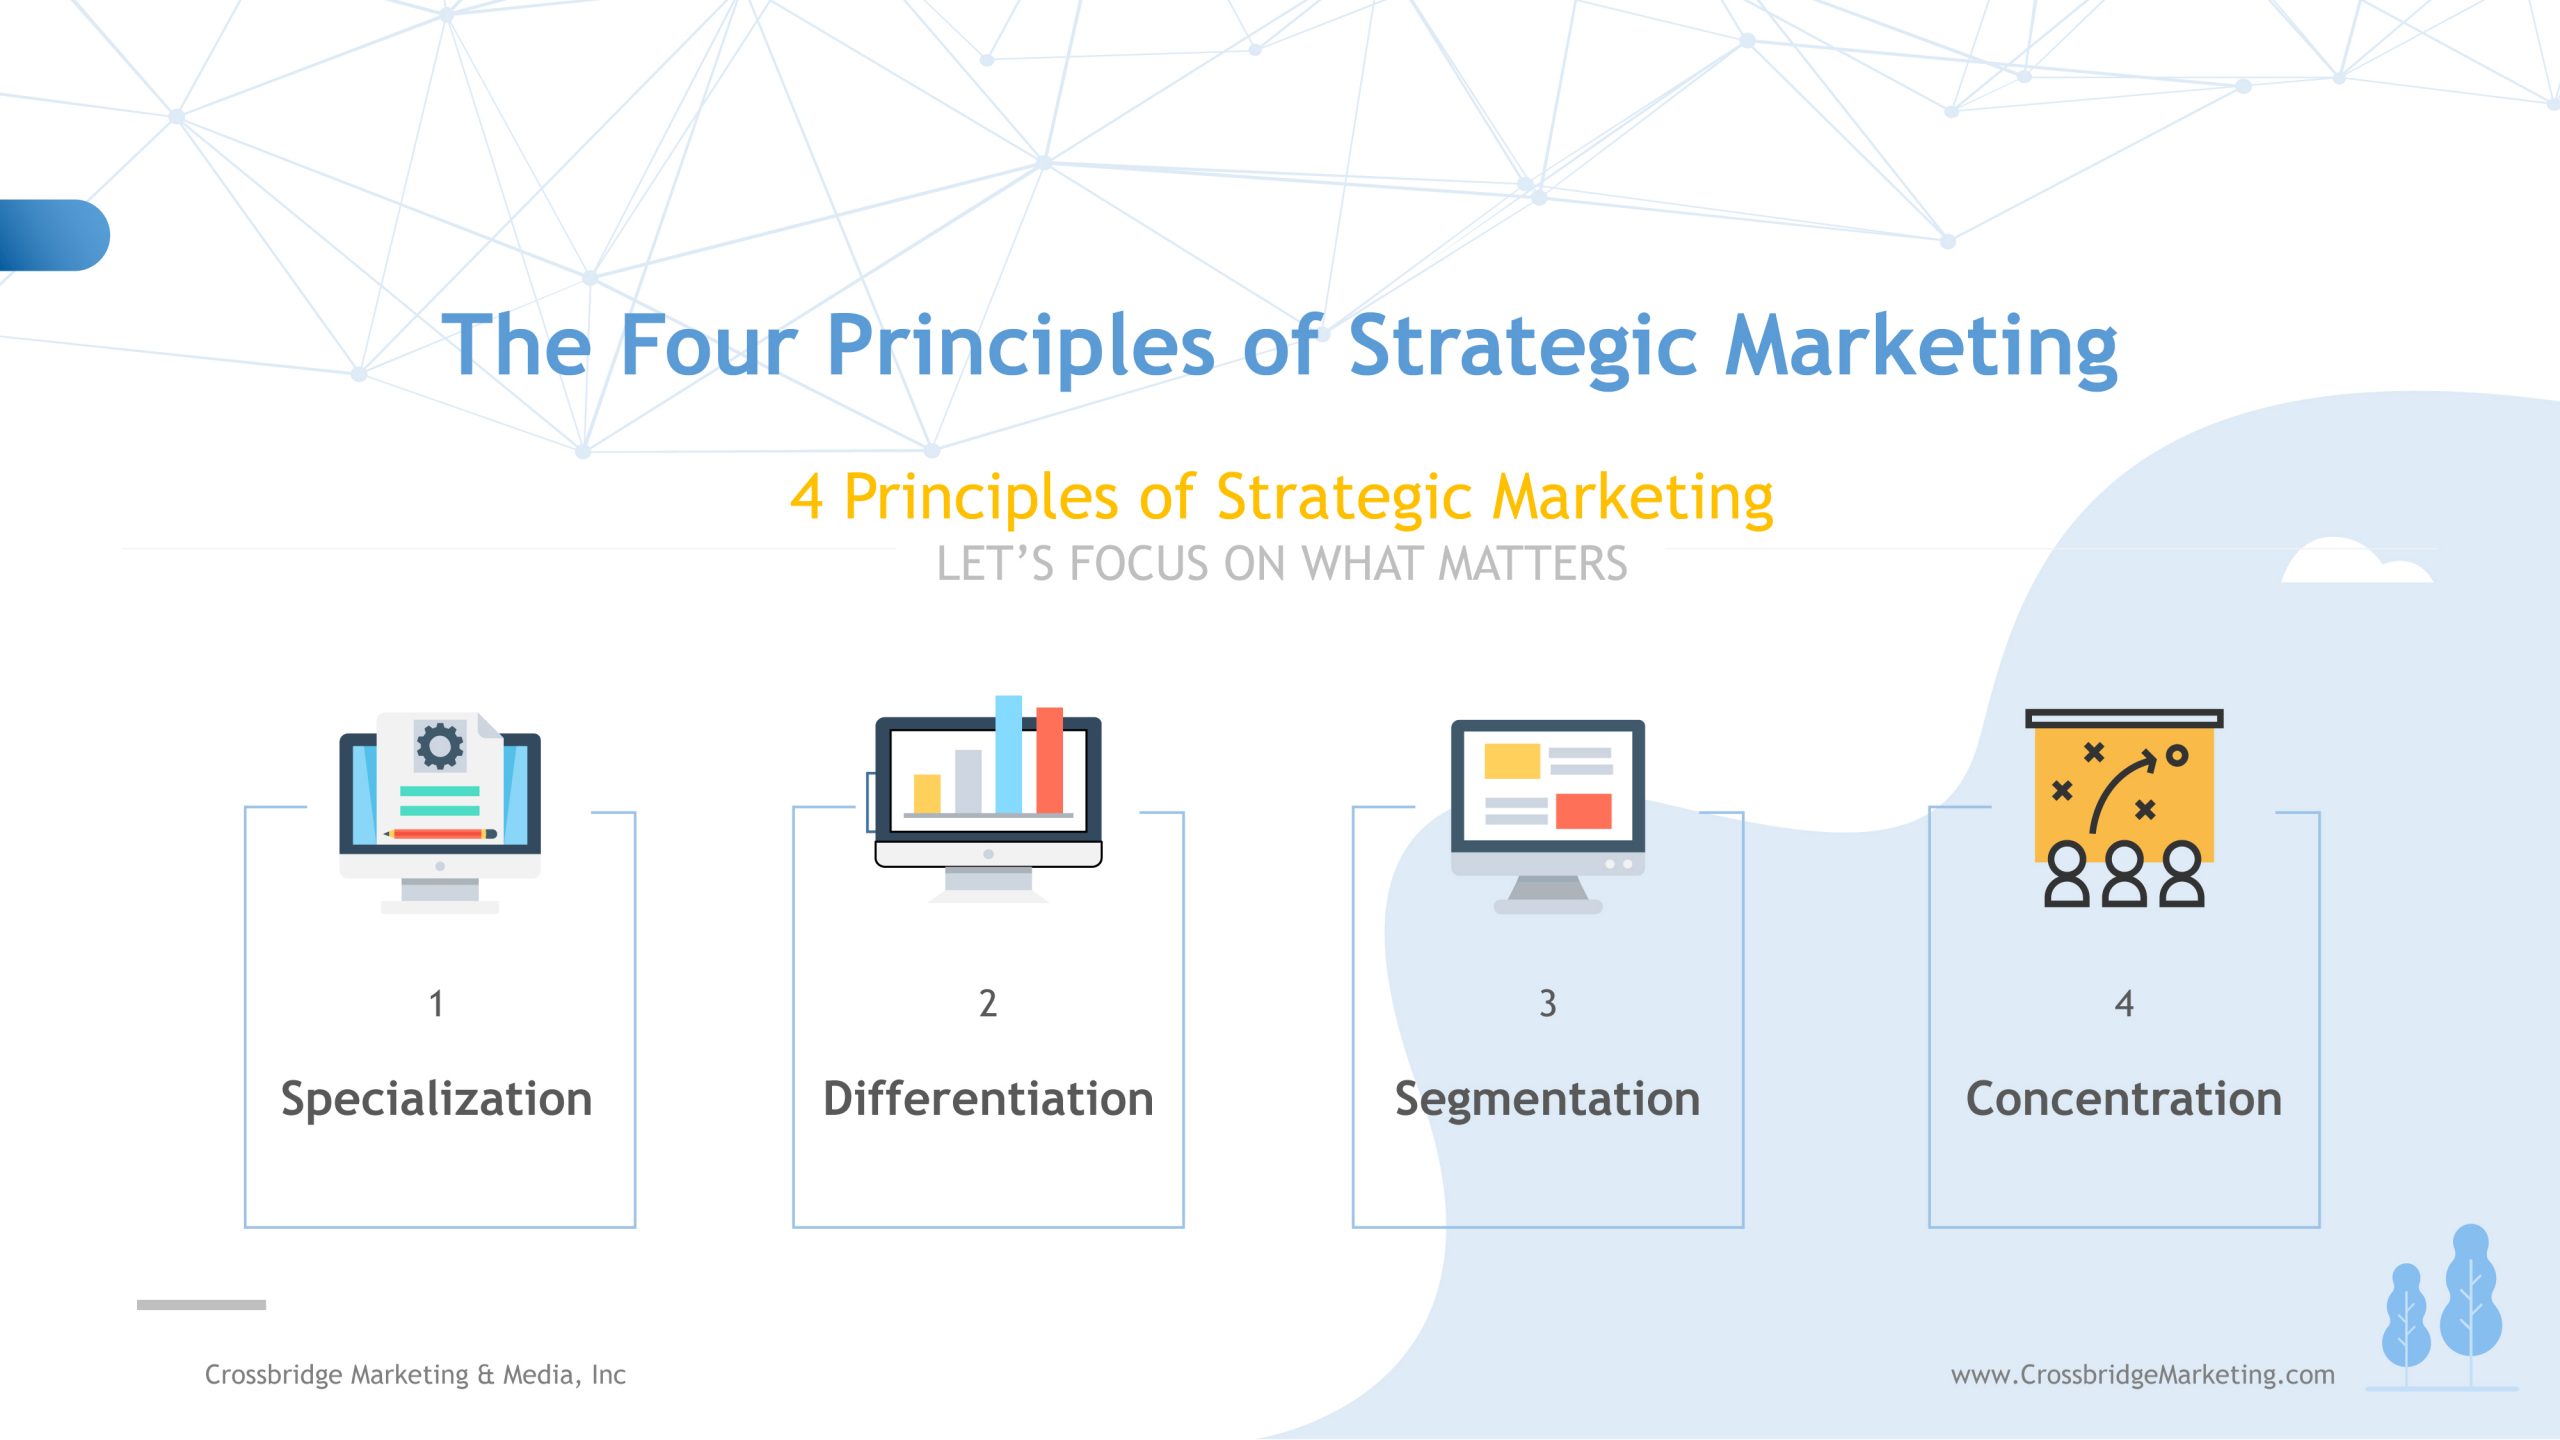 Strategic Marketing is the Key to Scaling Your Business